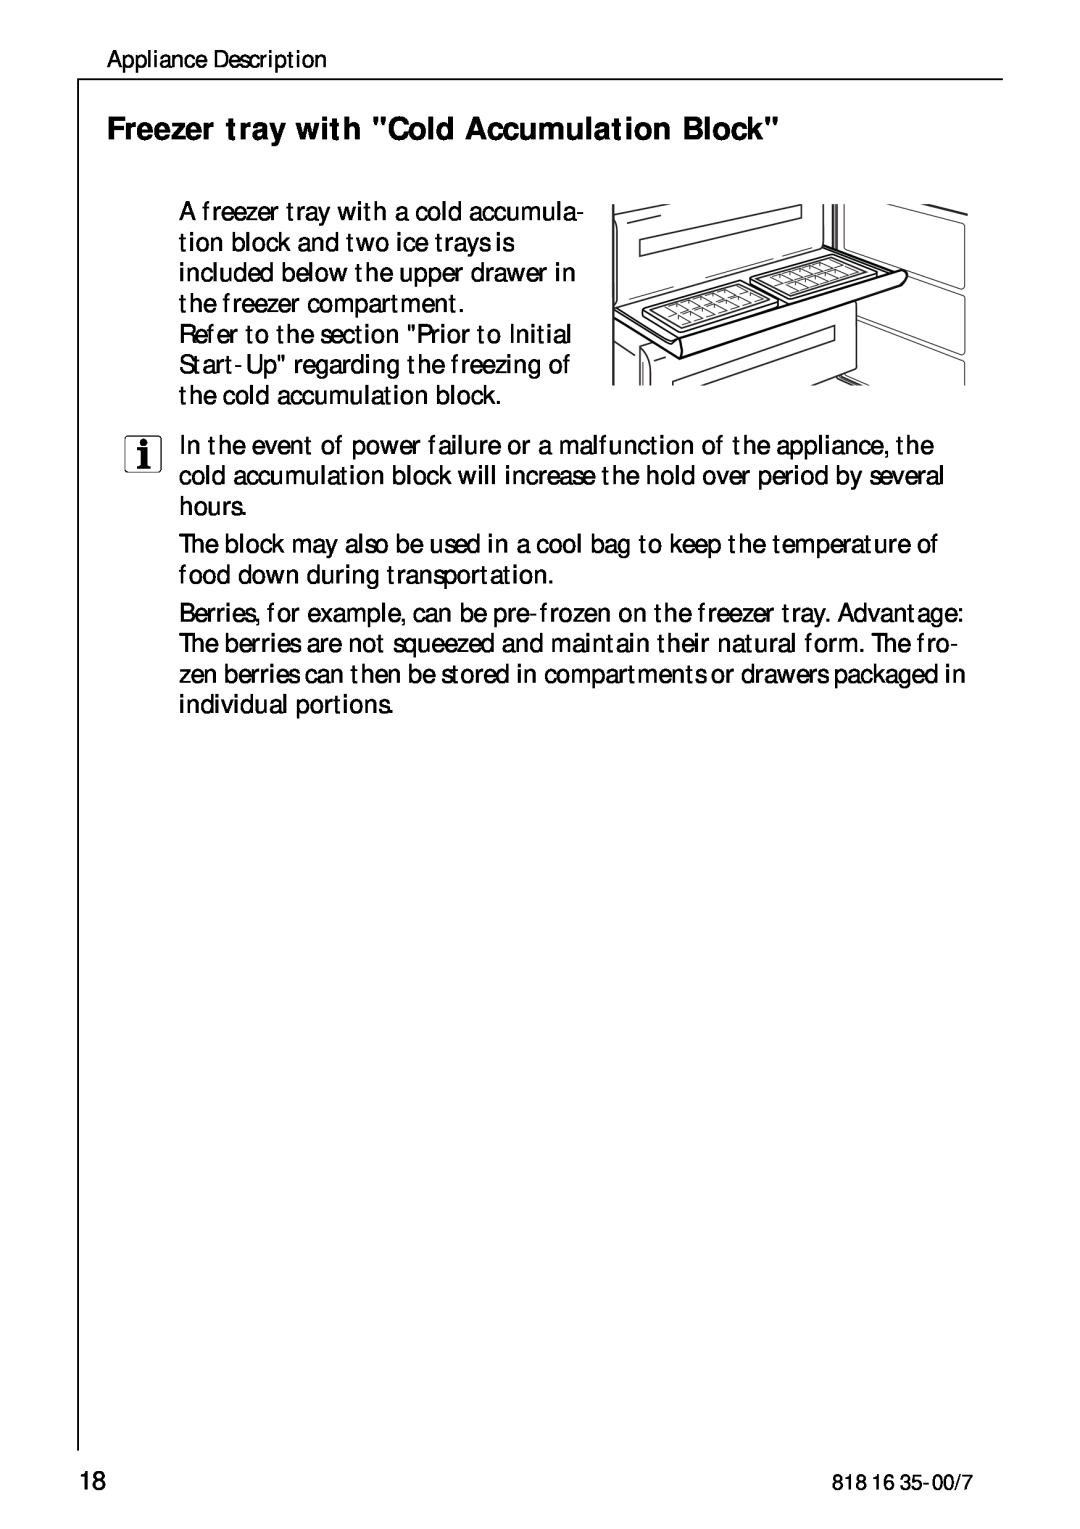 Electrolux KO_SANTO 4085 operating instructions Freezer tray with Cold Accumulation Block 